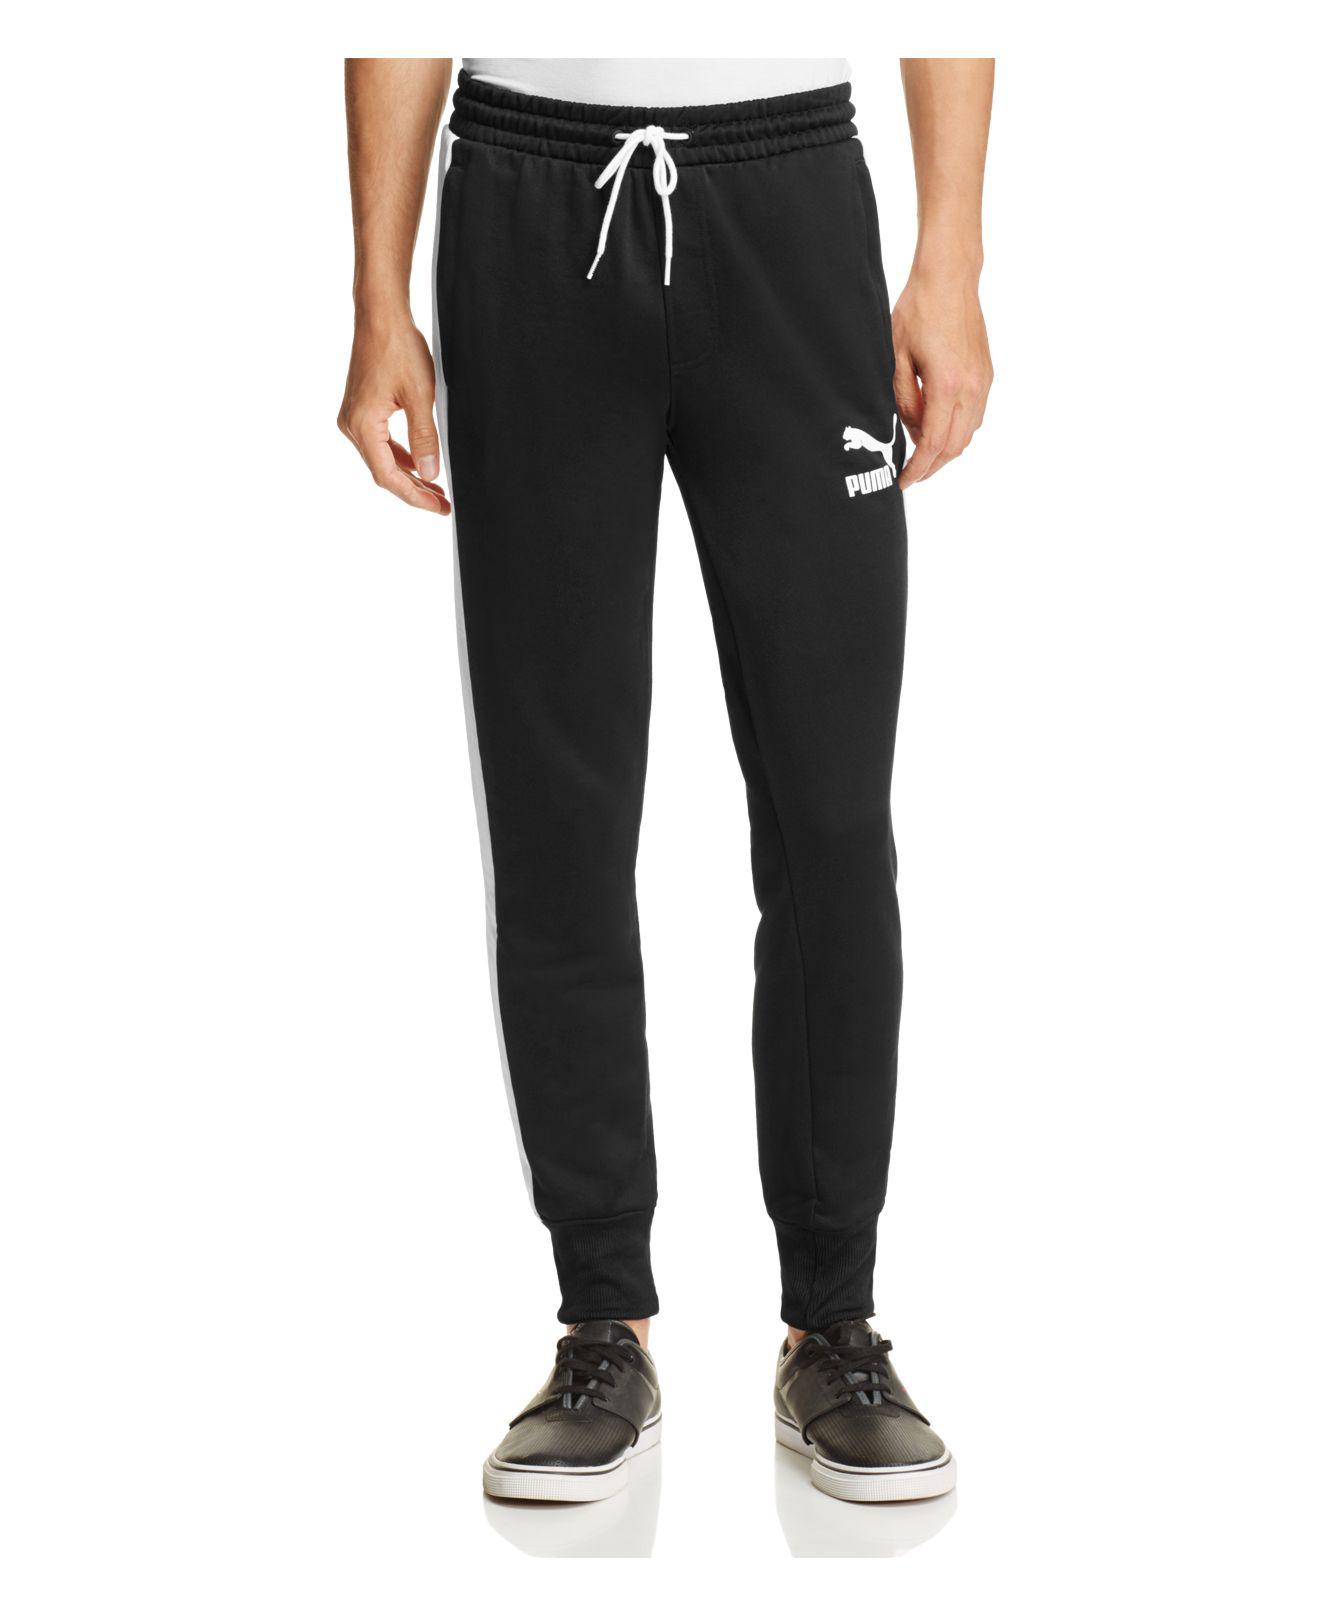 Lyst - Puma Archive T7 Track Pants in Black for Men